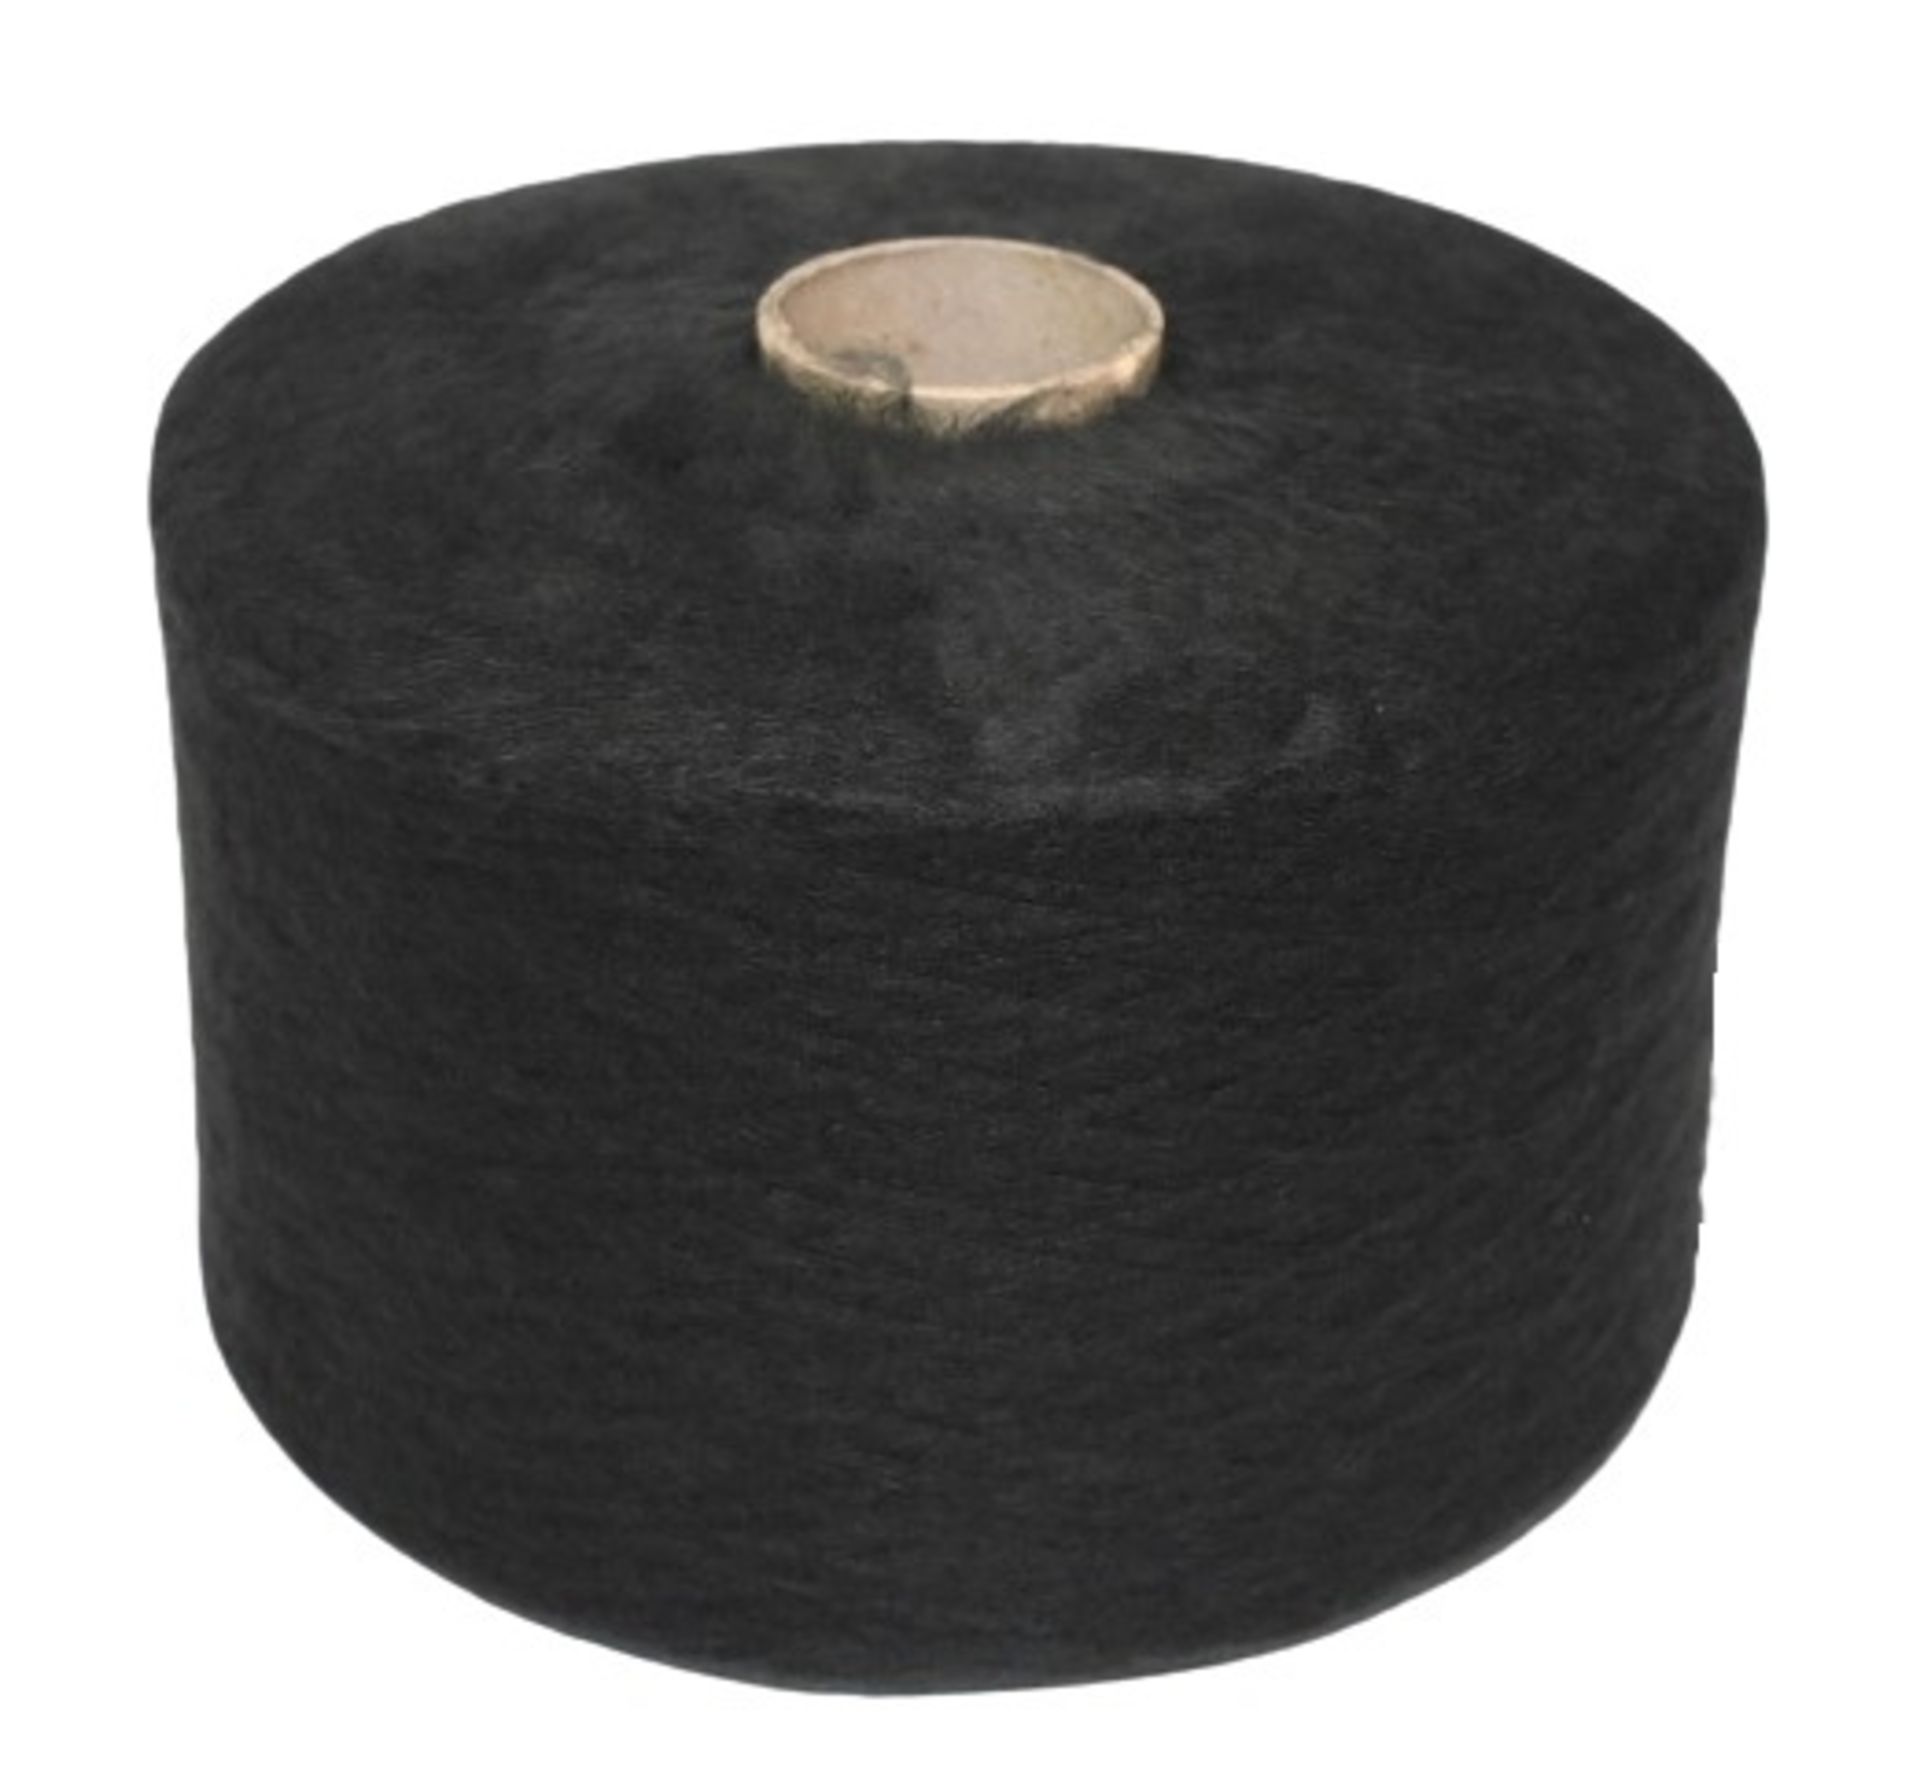 6 x Cones of 1/7,5 Lagona Knitting Yarn - Charcoal - Approx Weight: 2,300g - New Stock ABL Yarn - Image 3 of 11